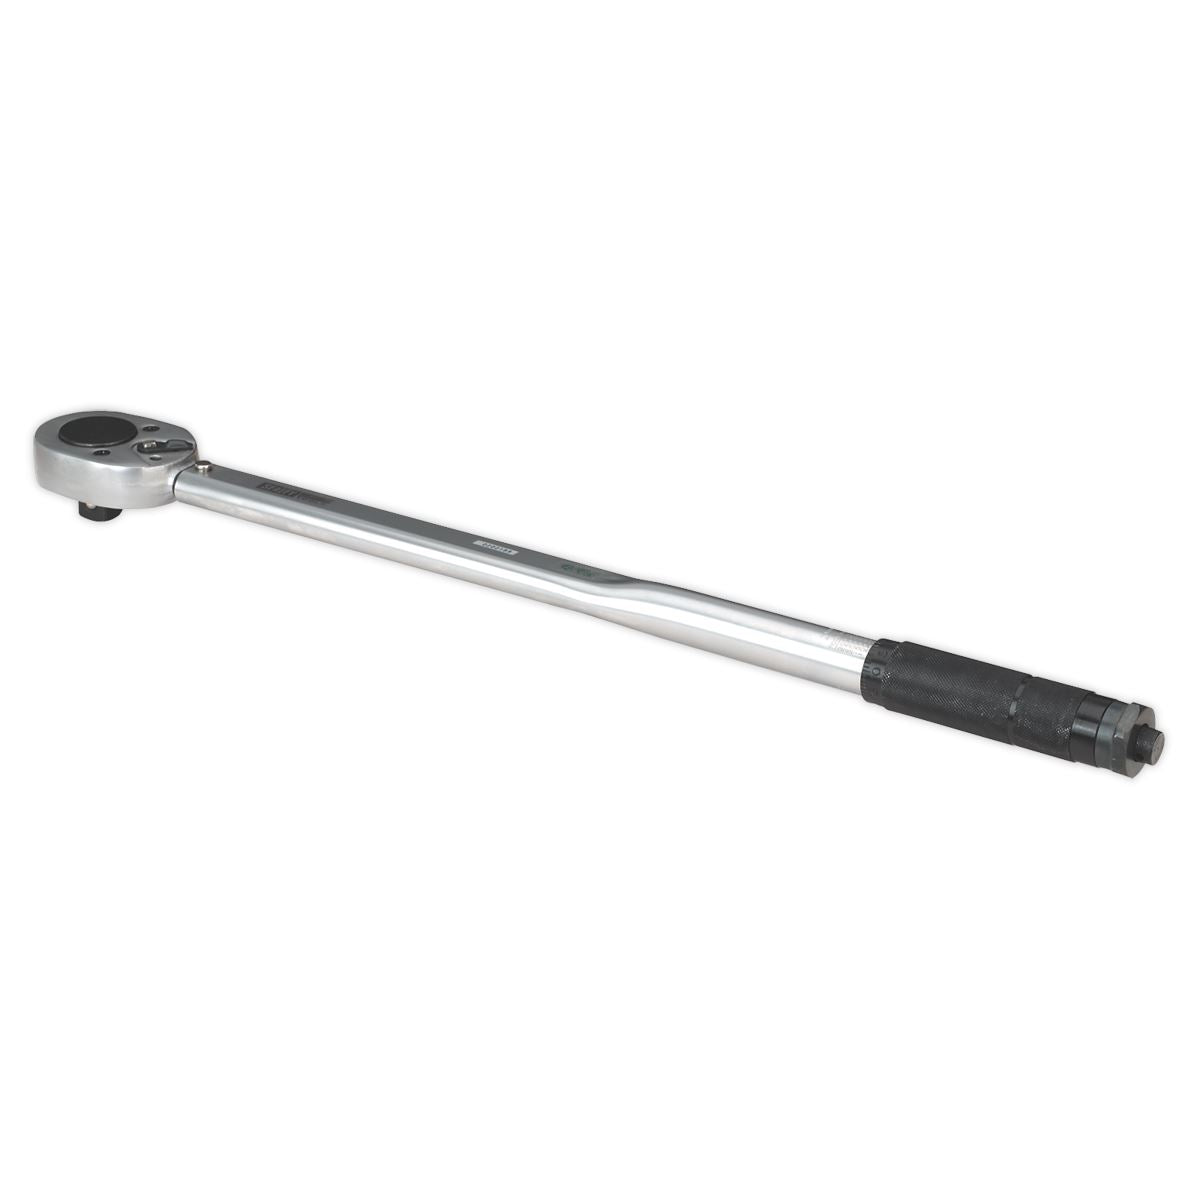 Sealey Premier Micrometer Torque Wrench 3/4"Sq Drive Calibrated